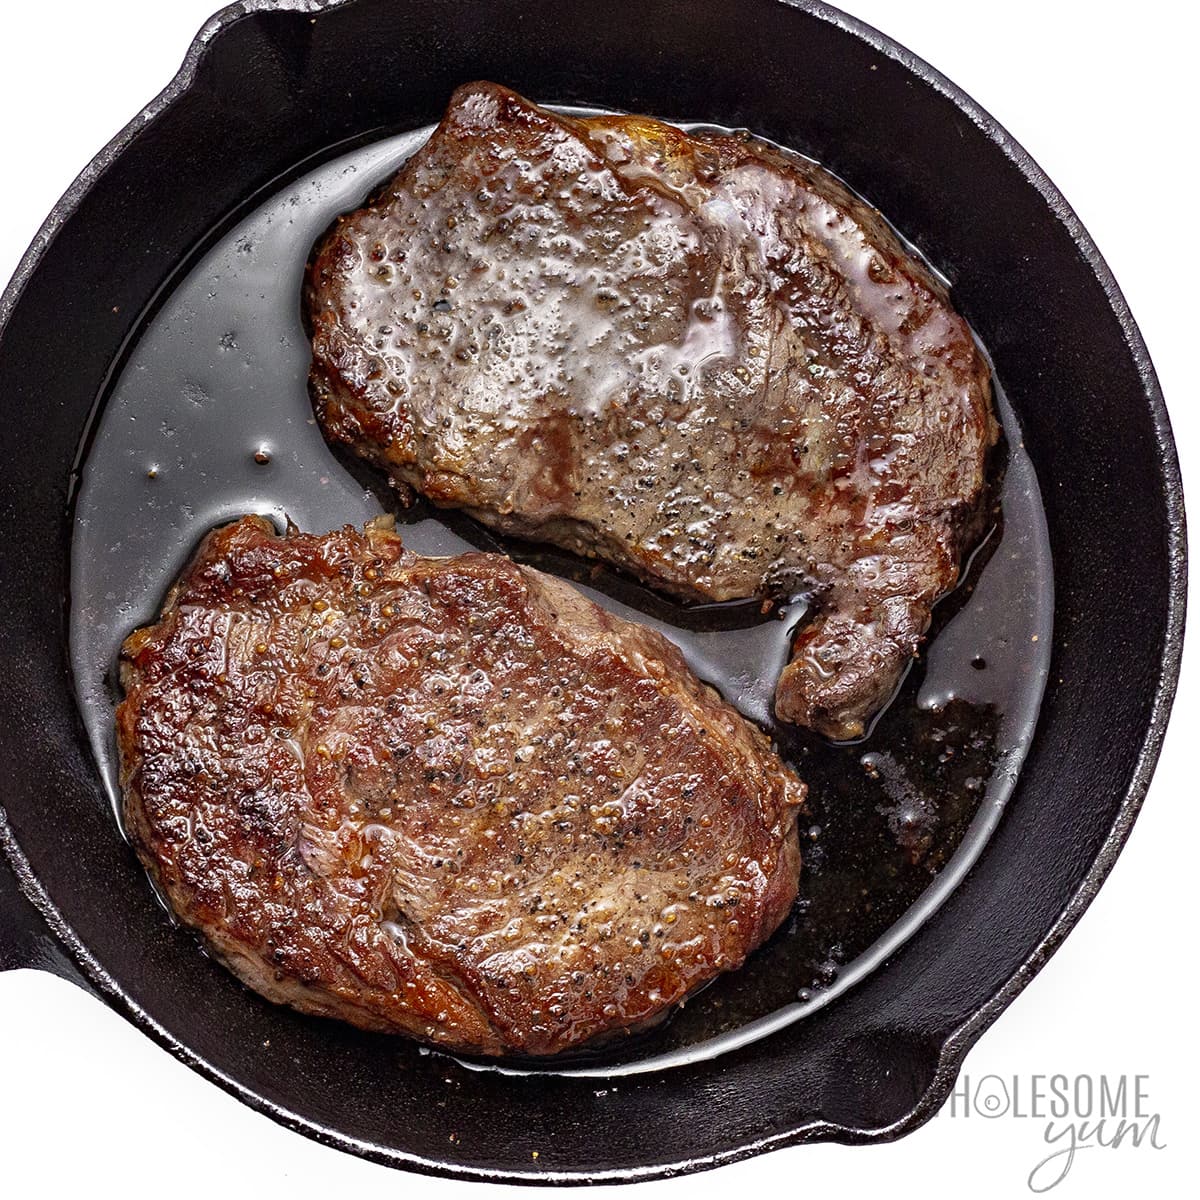 Chuck's eye steak fully cooked in a frying pan.